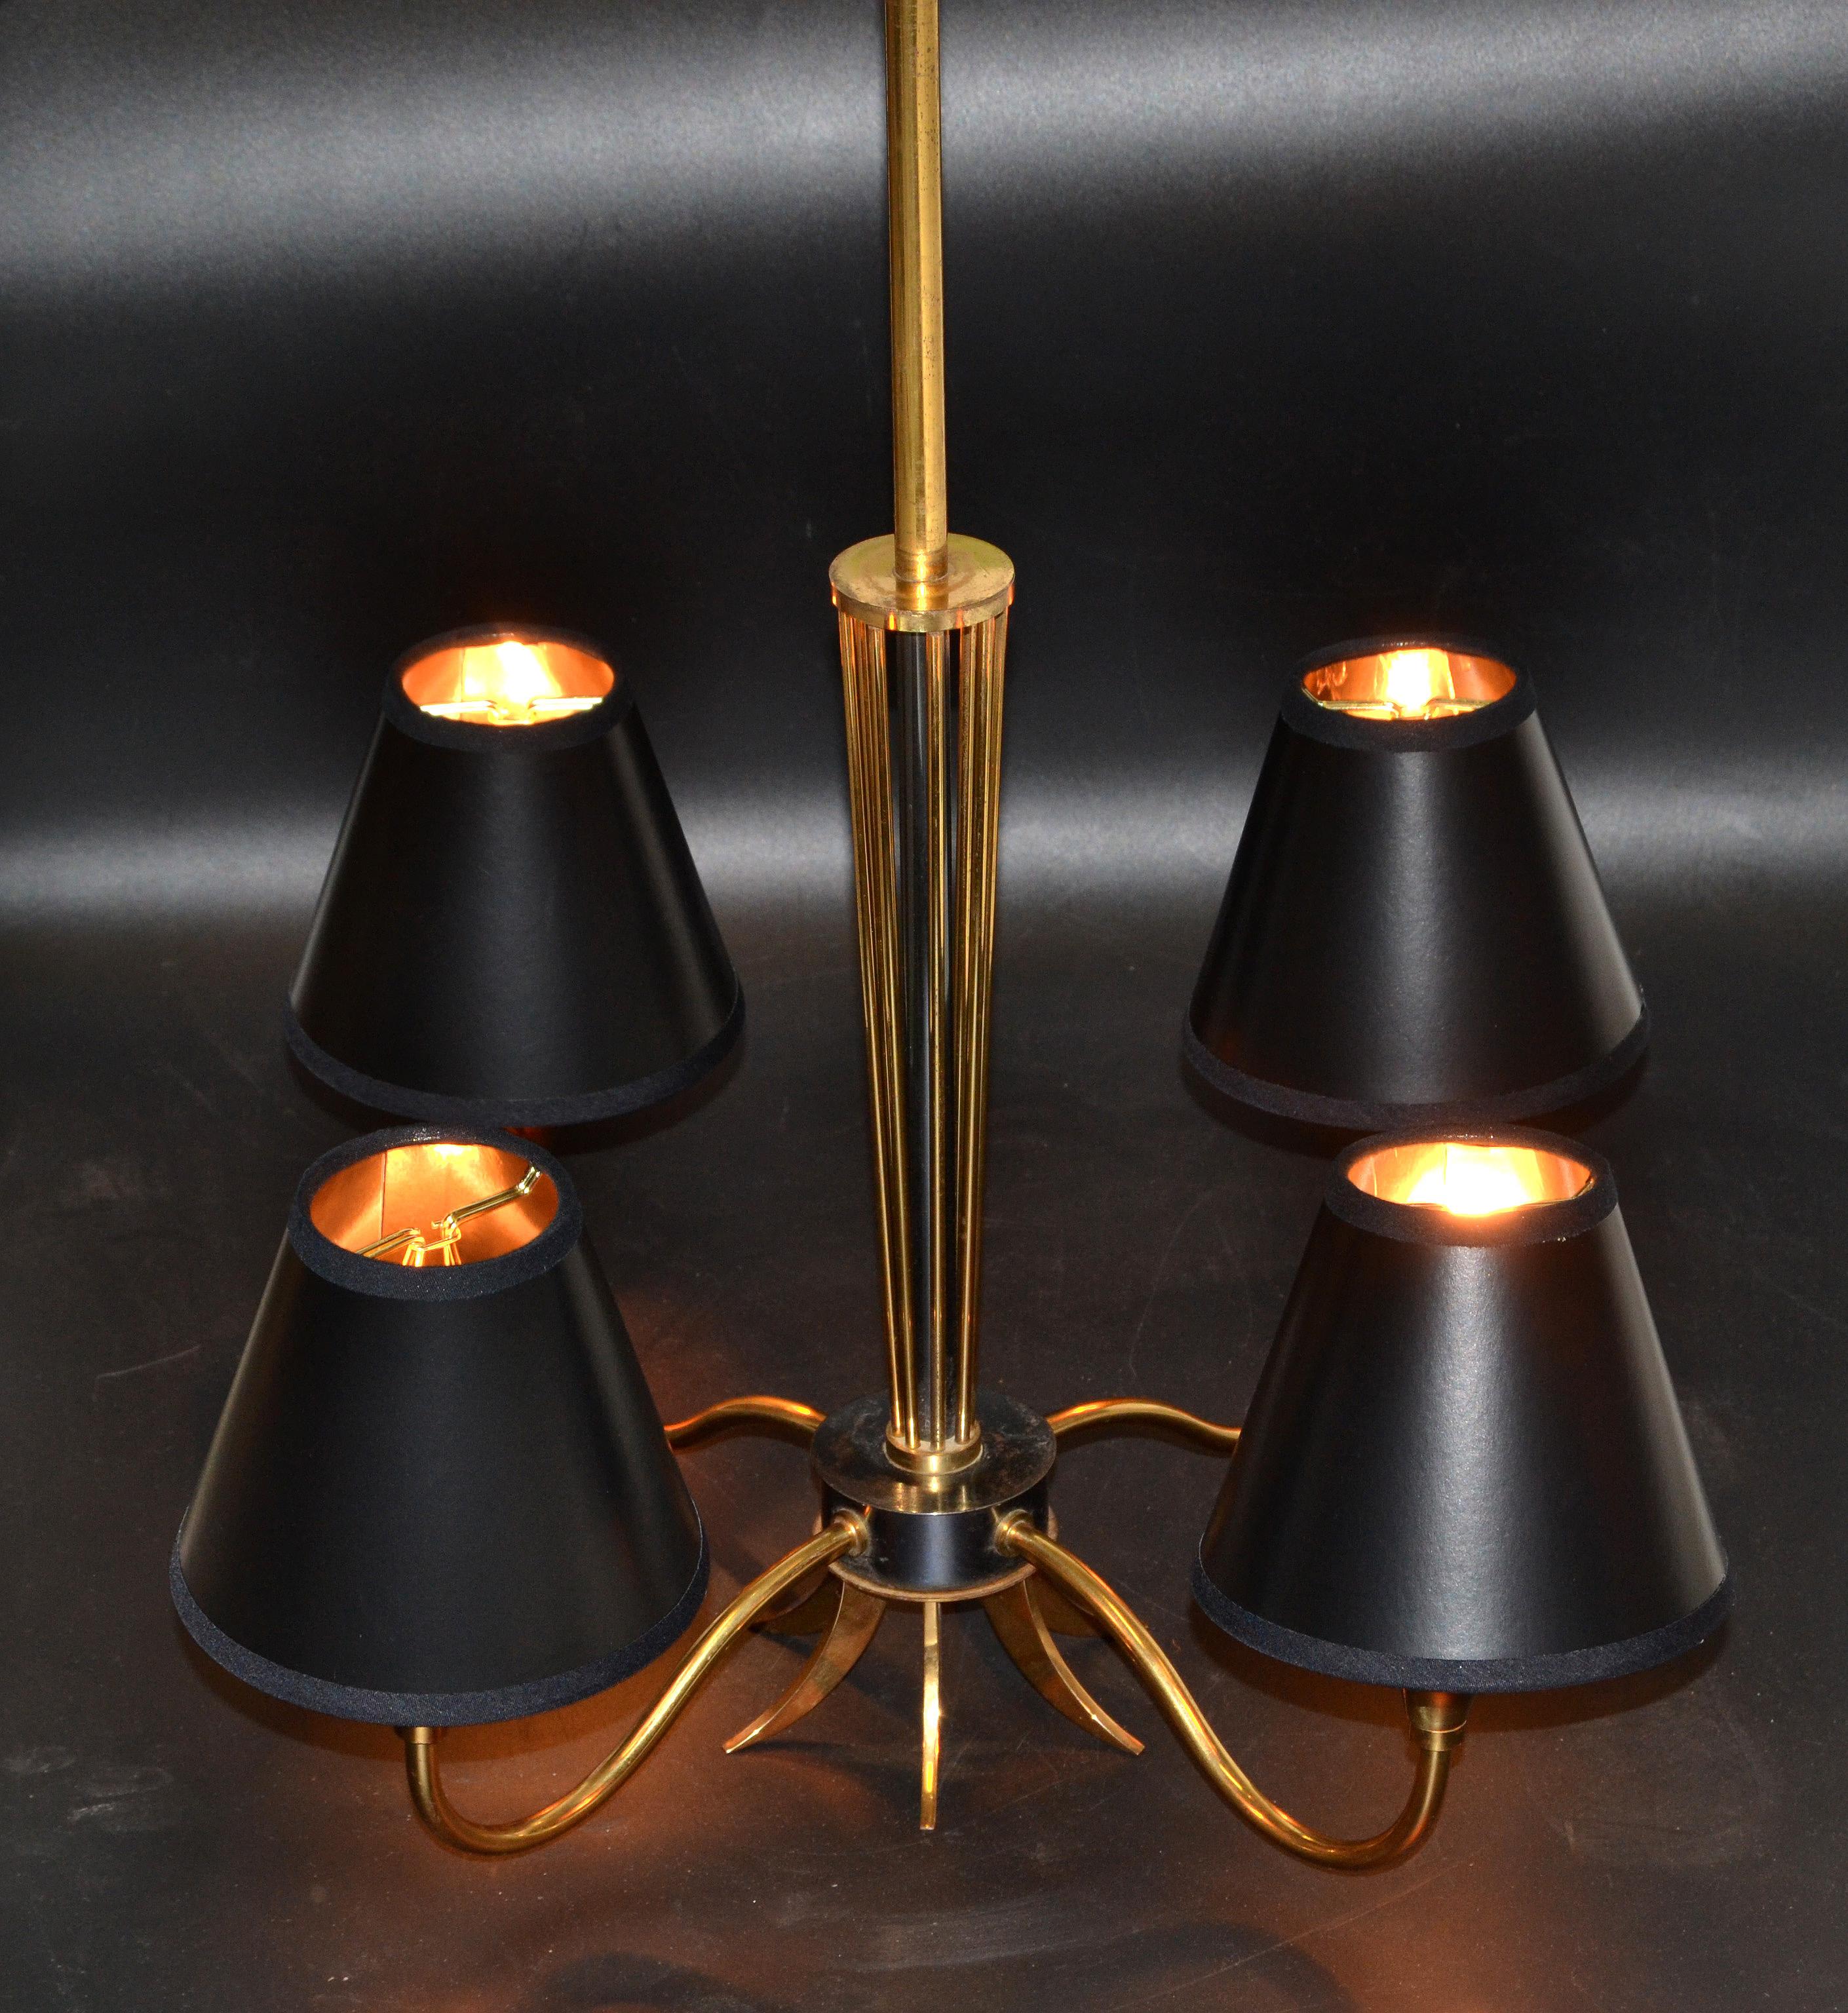 Patinated Maison Lunel Four-Light Chandelier Brass and Gun Metal French Mid-Century Modern For Sale